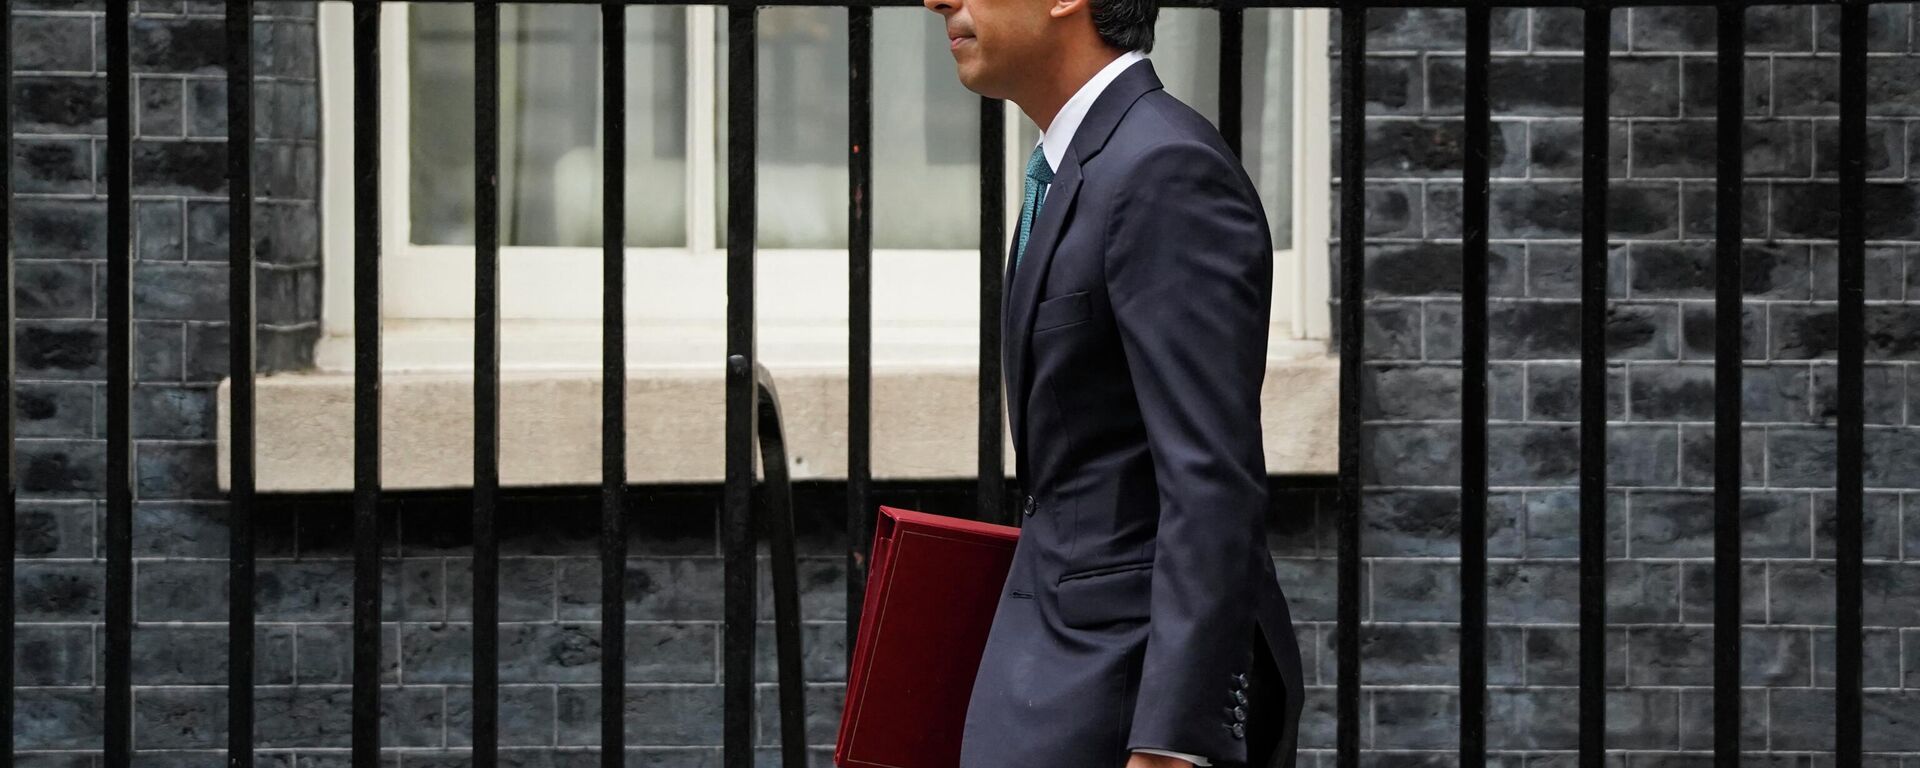 Britain's Prime Minister Rishi Sunak leaves 10 Downing Street in central London on October 26, 2022, for the House of Commons to take part in his first Prime Minister's Questions (PMQs) - Sputnik International, 1920, 01.11.2022